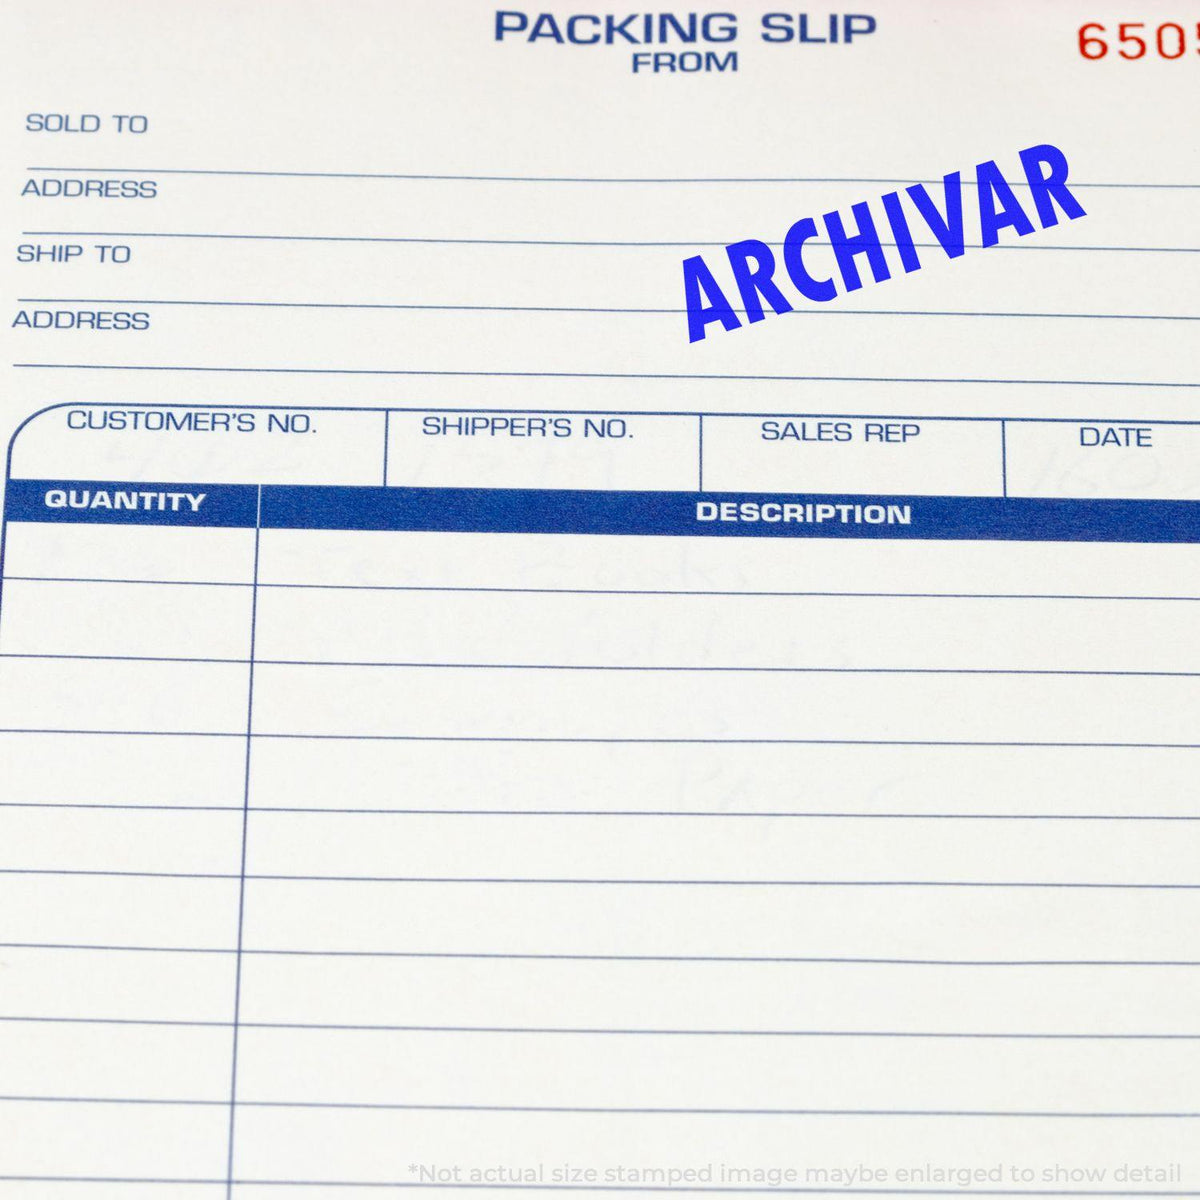 Archivar Rubber Stamp In Use Photo